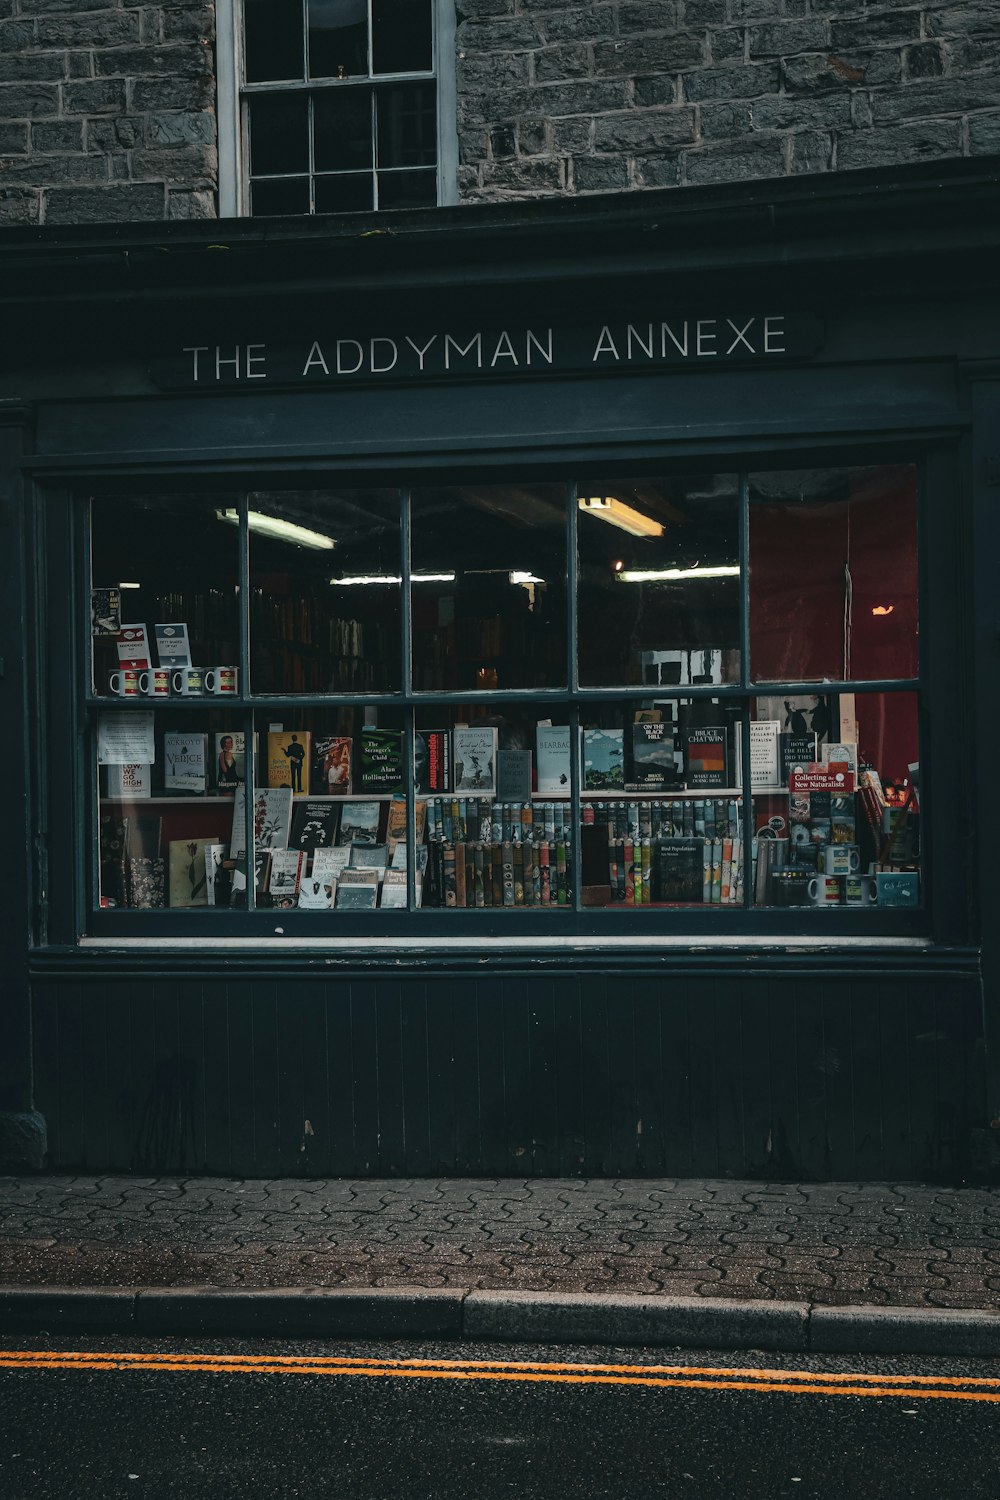 the front of a book store on a city street